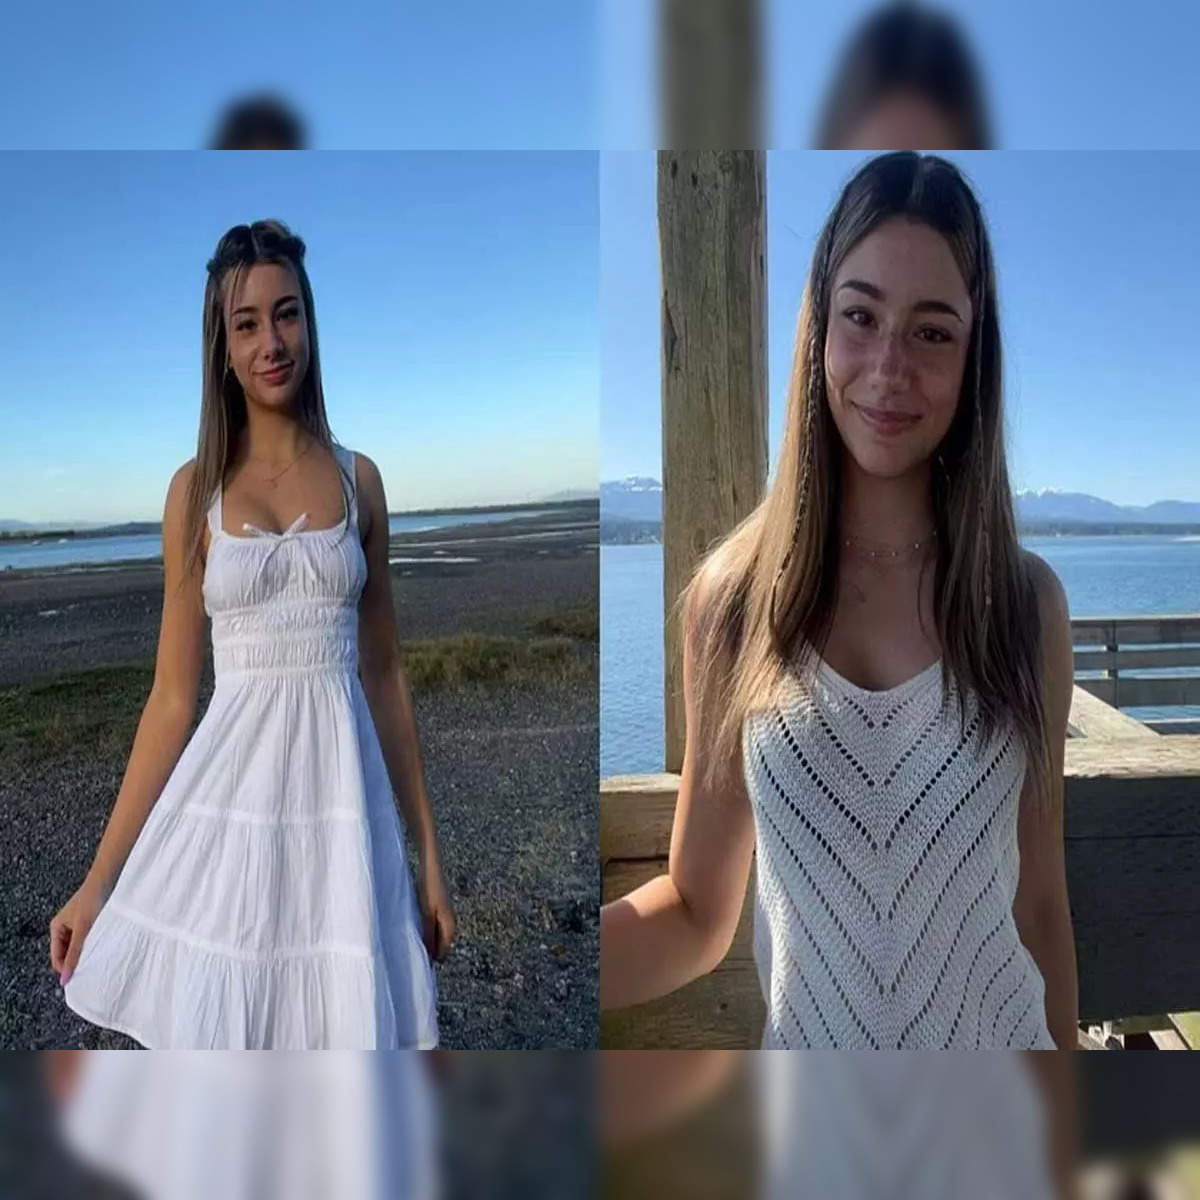 8 Saal Ki Hot Ladki - Mikayla Campinos: 16-year-old TikTok star Mikayla Campinos dead? Know about  her viral video - The Economic Times